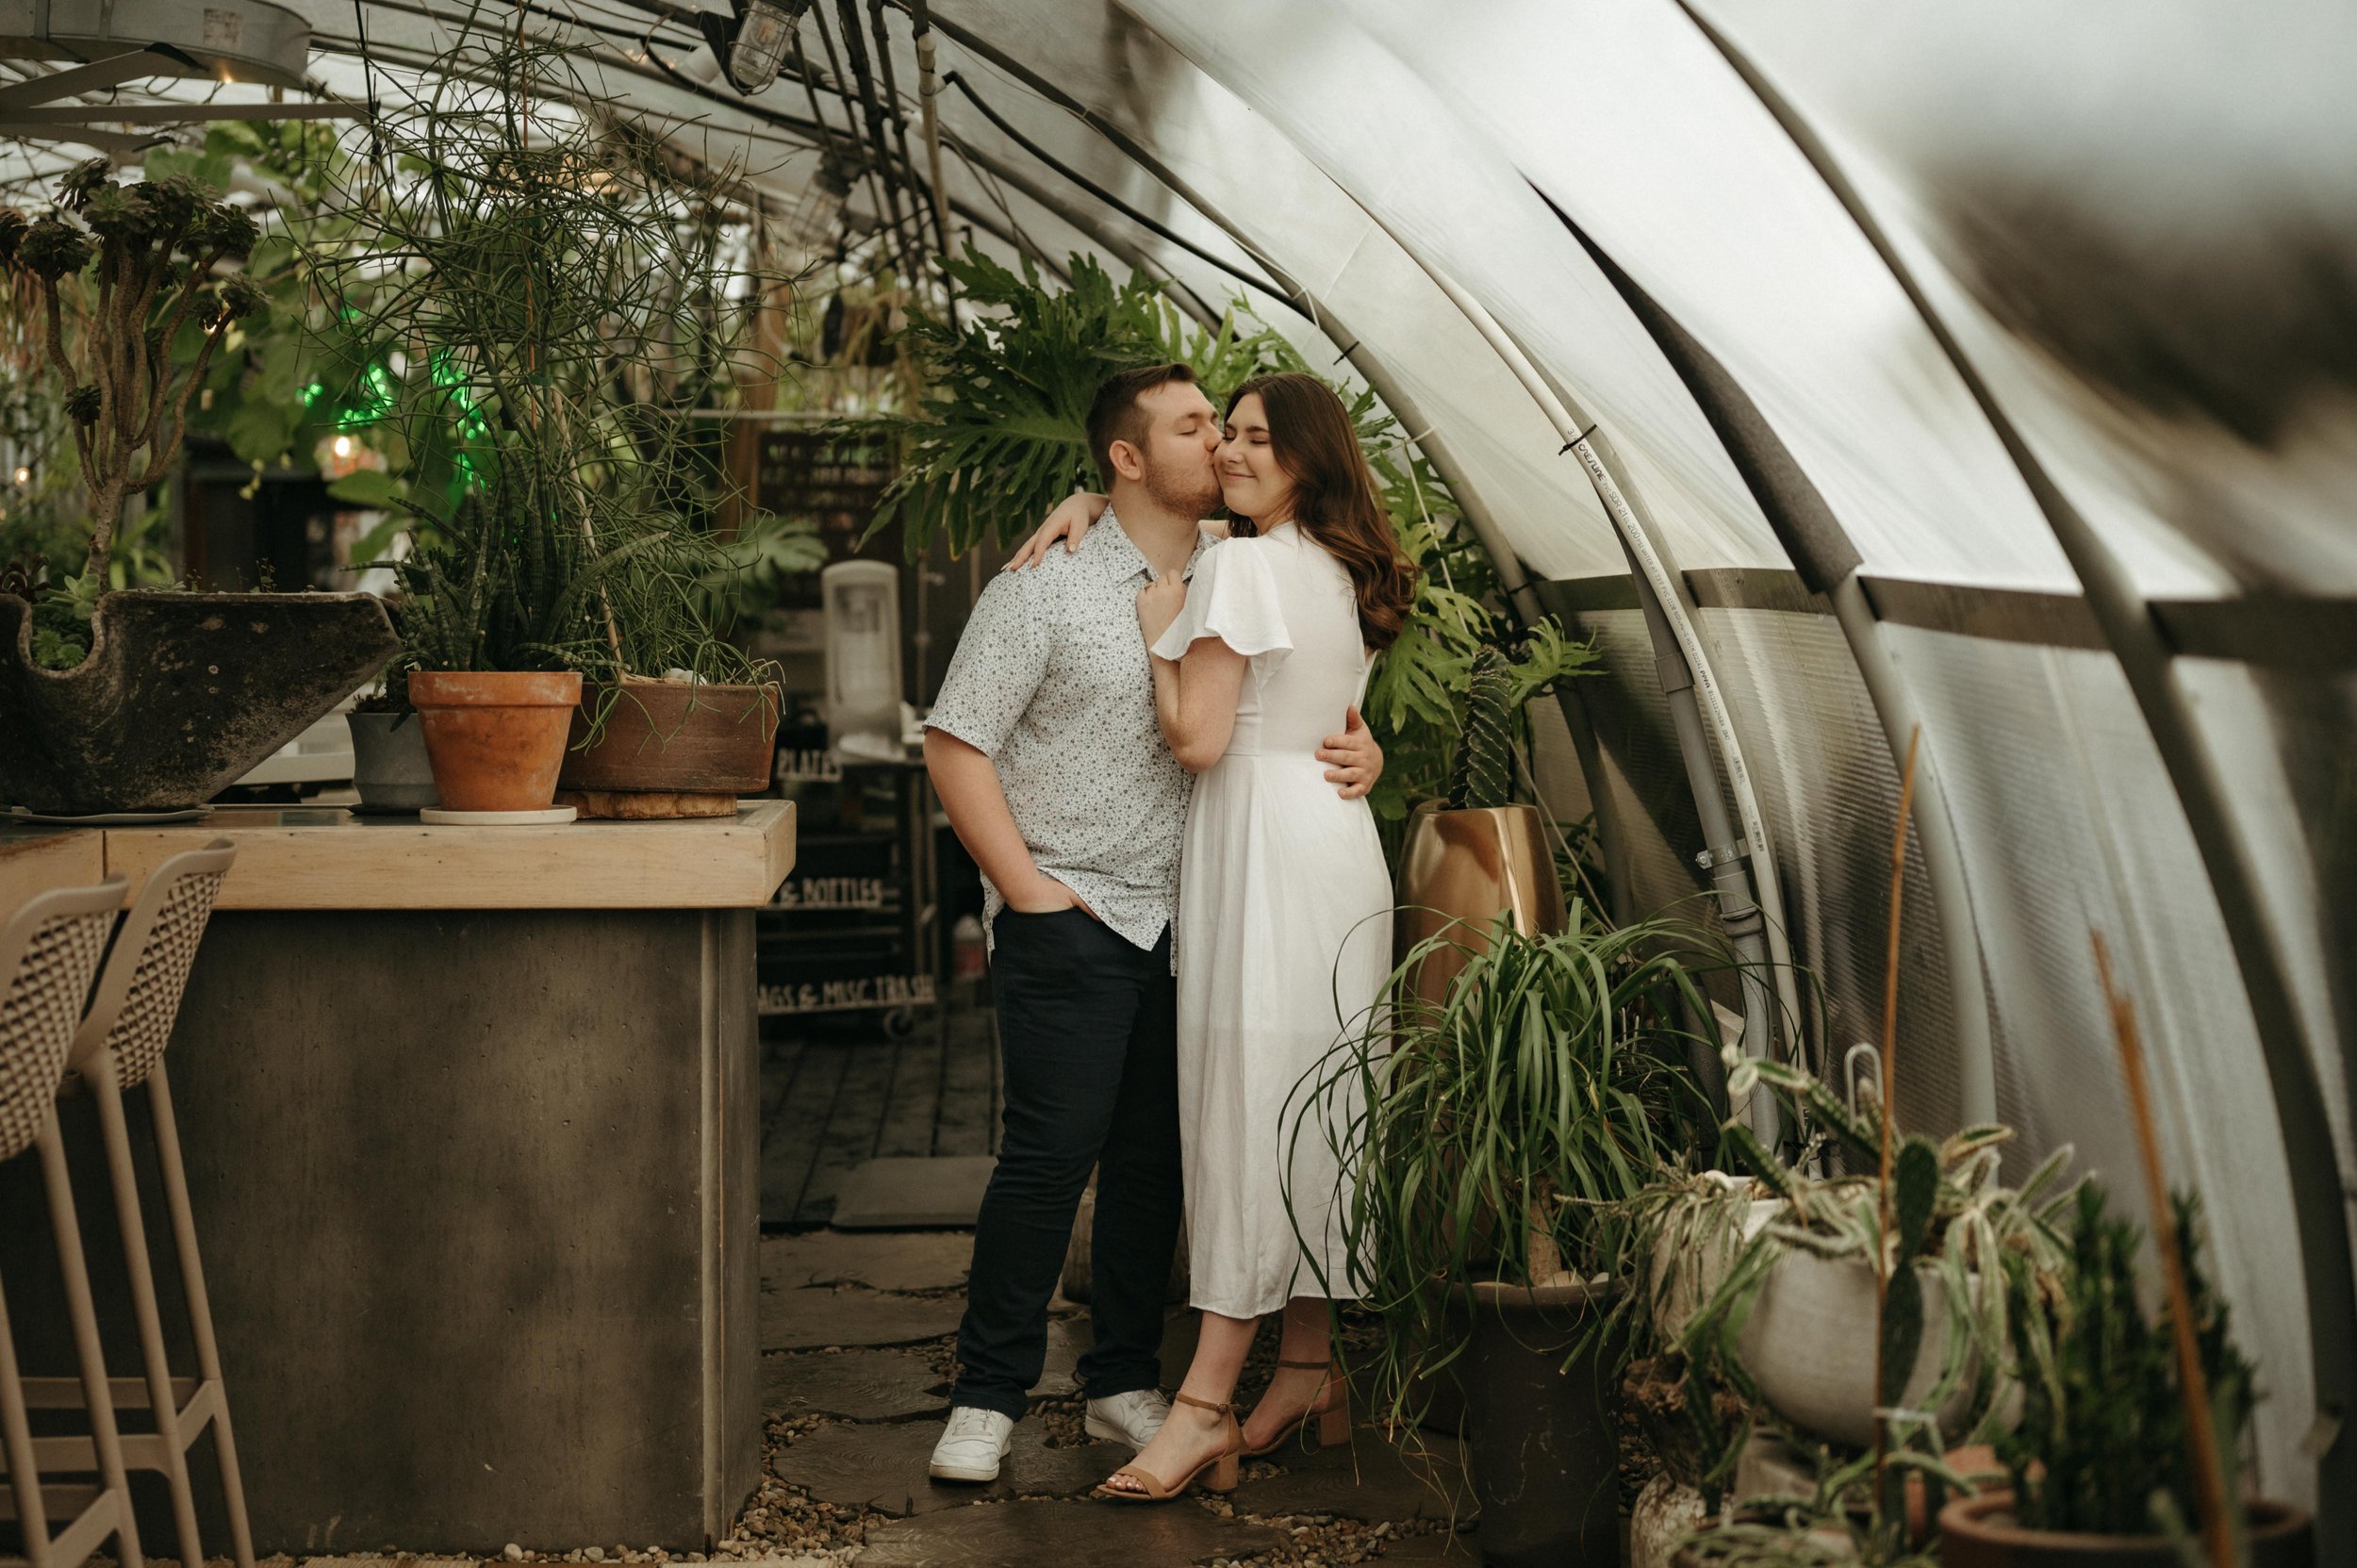 Amy and Caleb | Greenhouse Engagement Session | Nashville, Tennessee